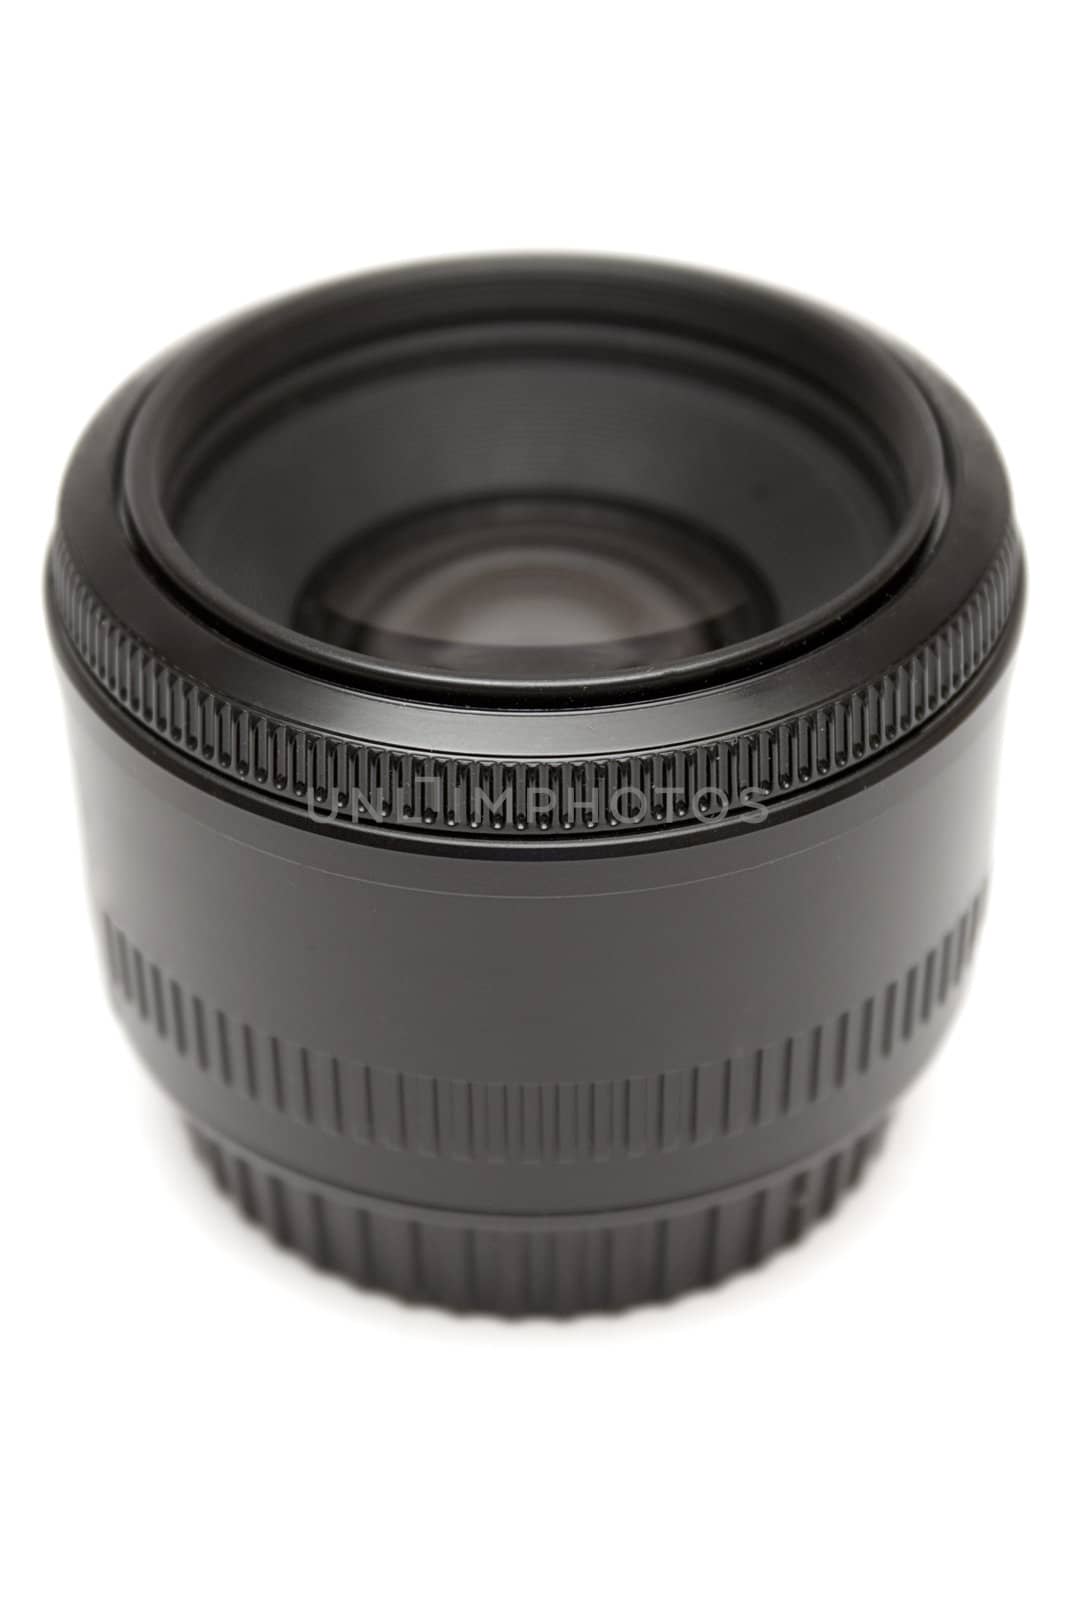 Black prime lens isolated on a white background.